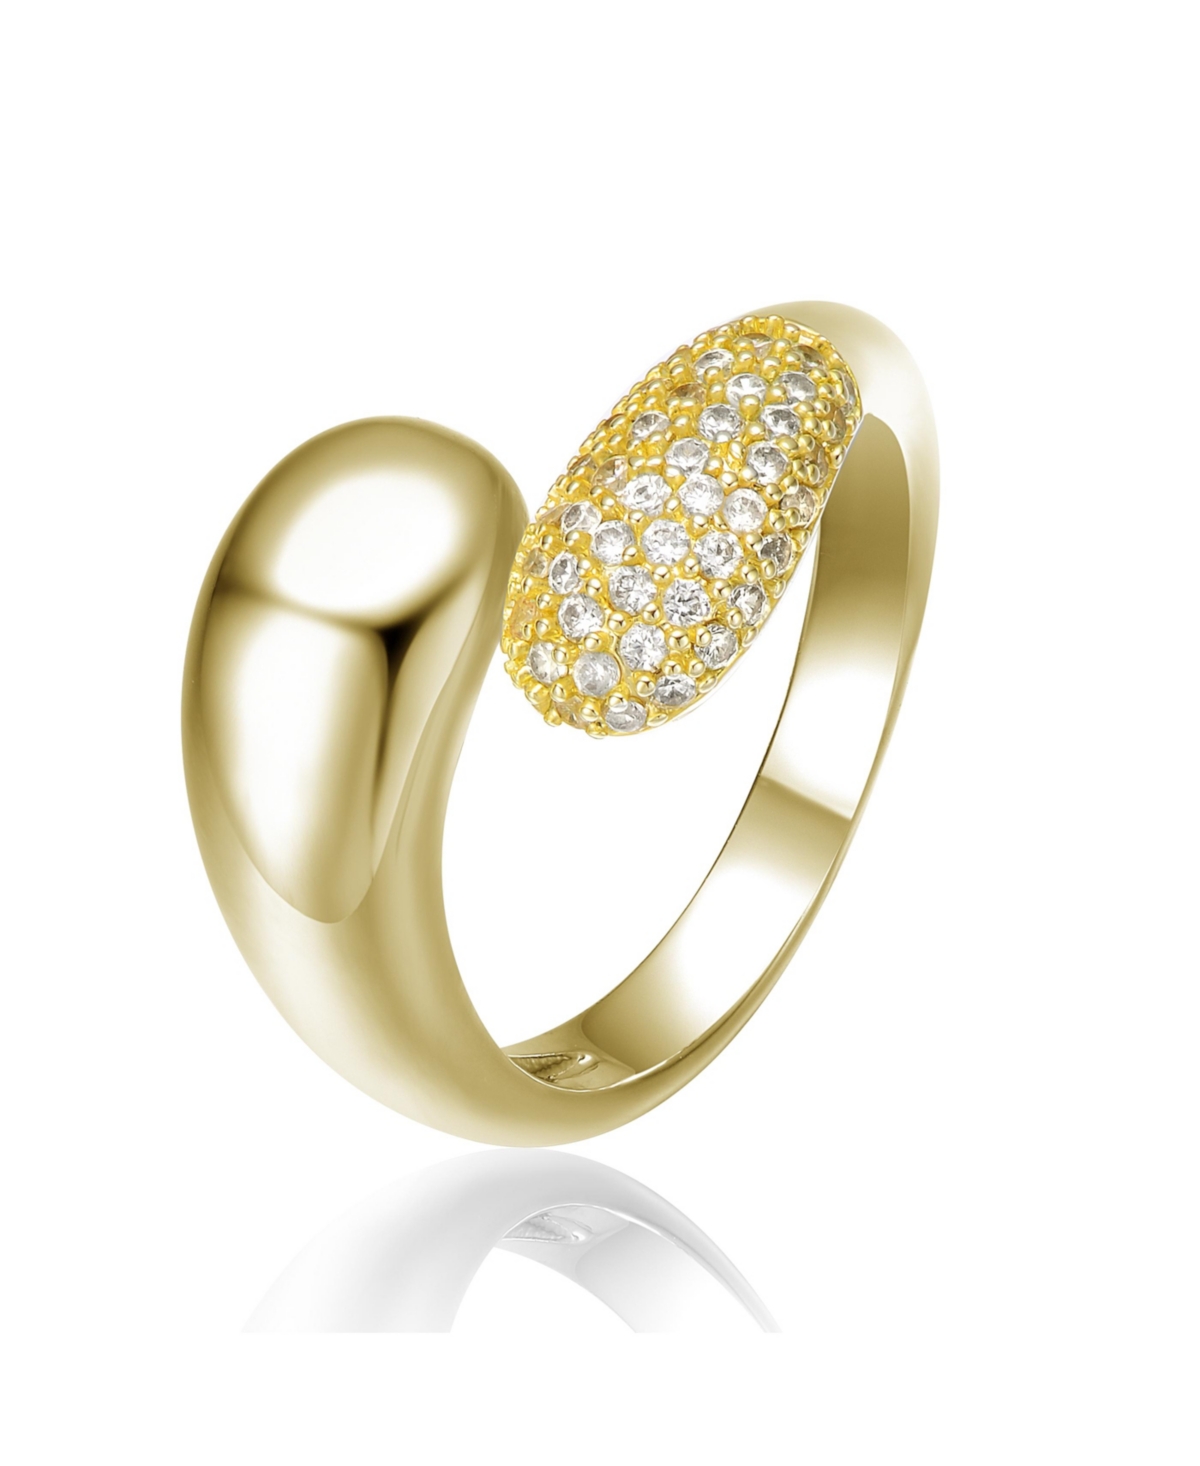 RACHEL GLAUBER 14K GOLD PLATED WITH FINE CUBIC ZIRCONIA BYPASS RING